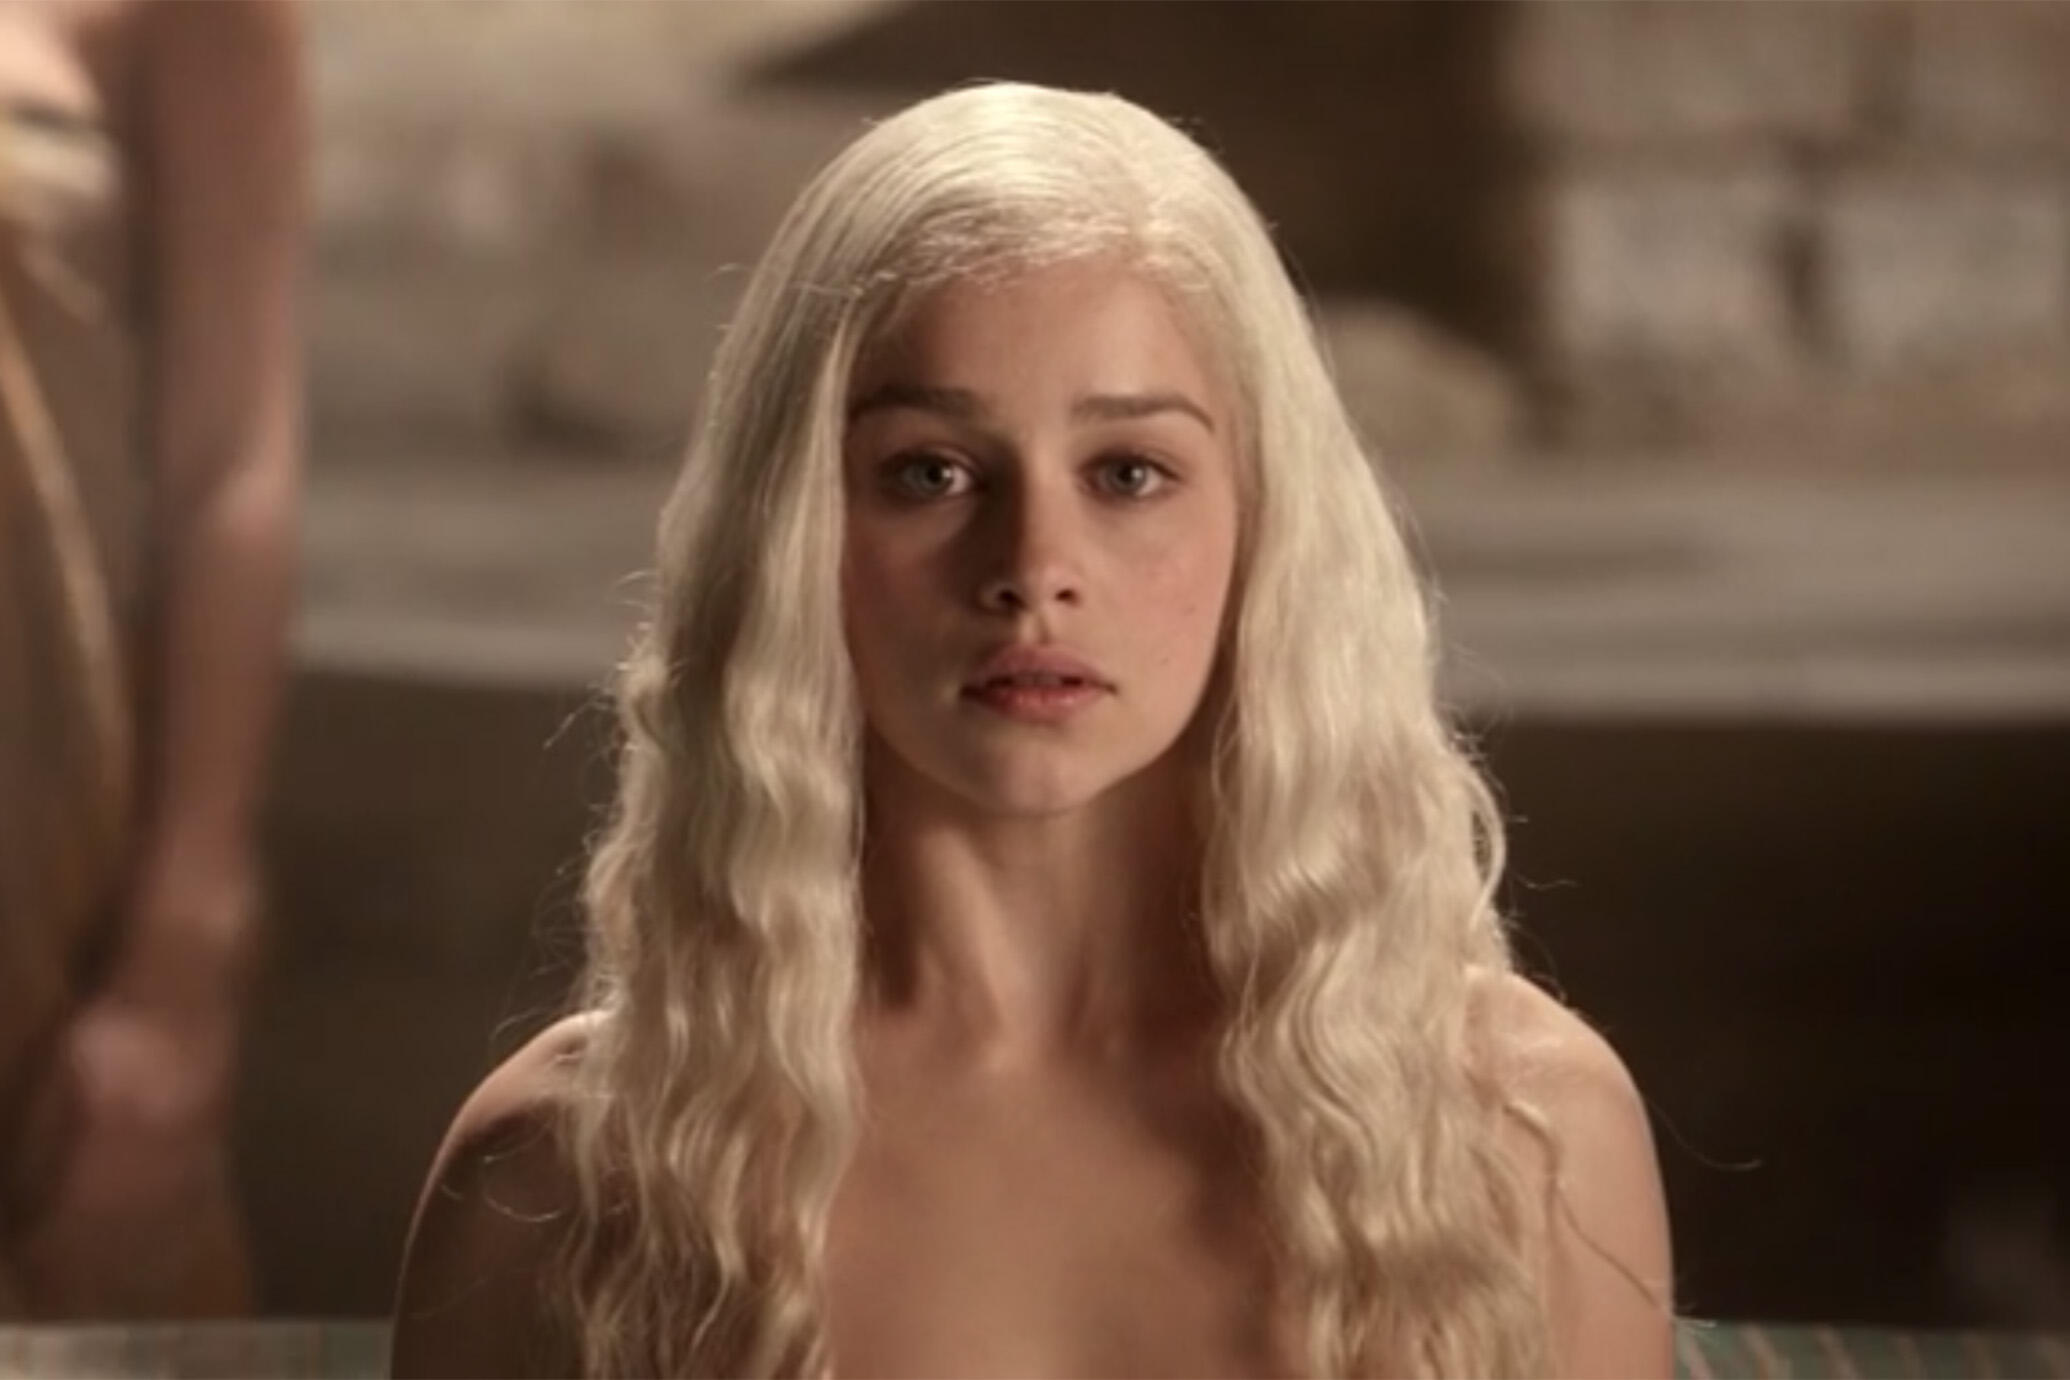 bert hudson recommends dragon lady game of thrones naked pic